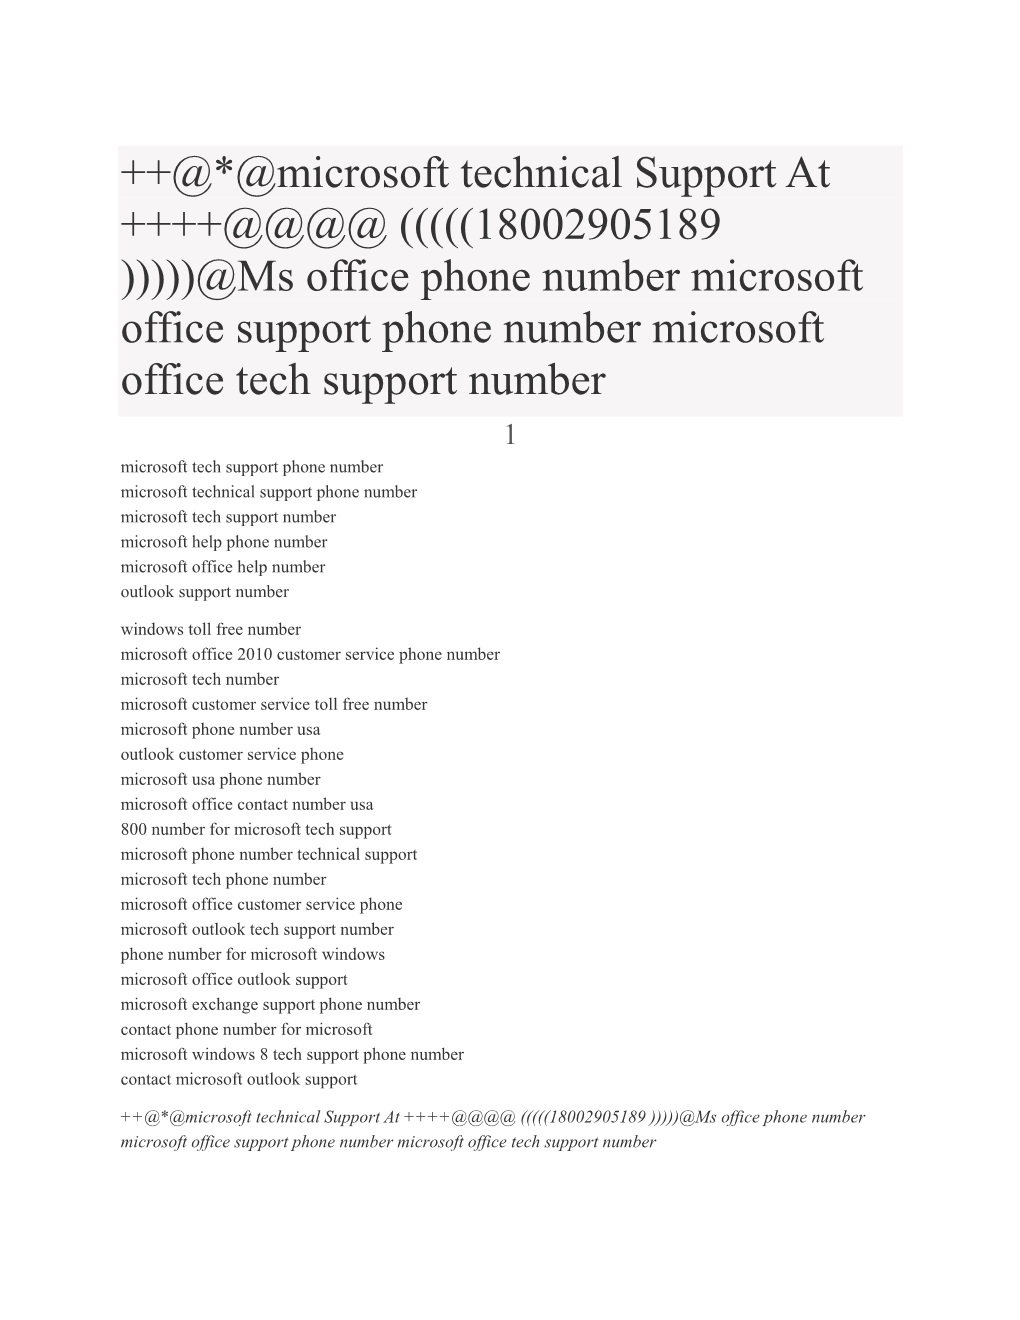 ++@*@Microsoft Technical Support at ++++@@@@ (((((18002905189 )))))@Ms Office Phone Number Microsoft Office Support Phone Number Microsoft Office Tech Support Number